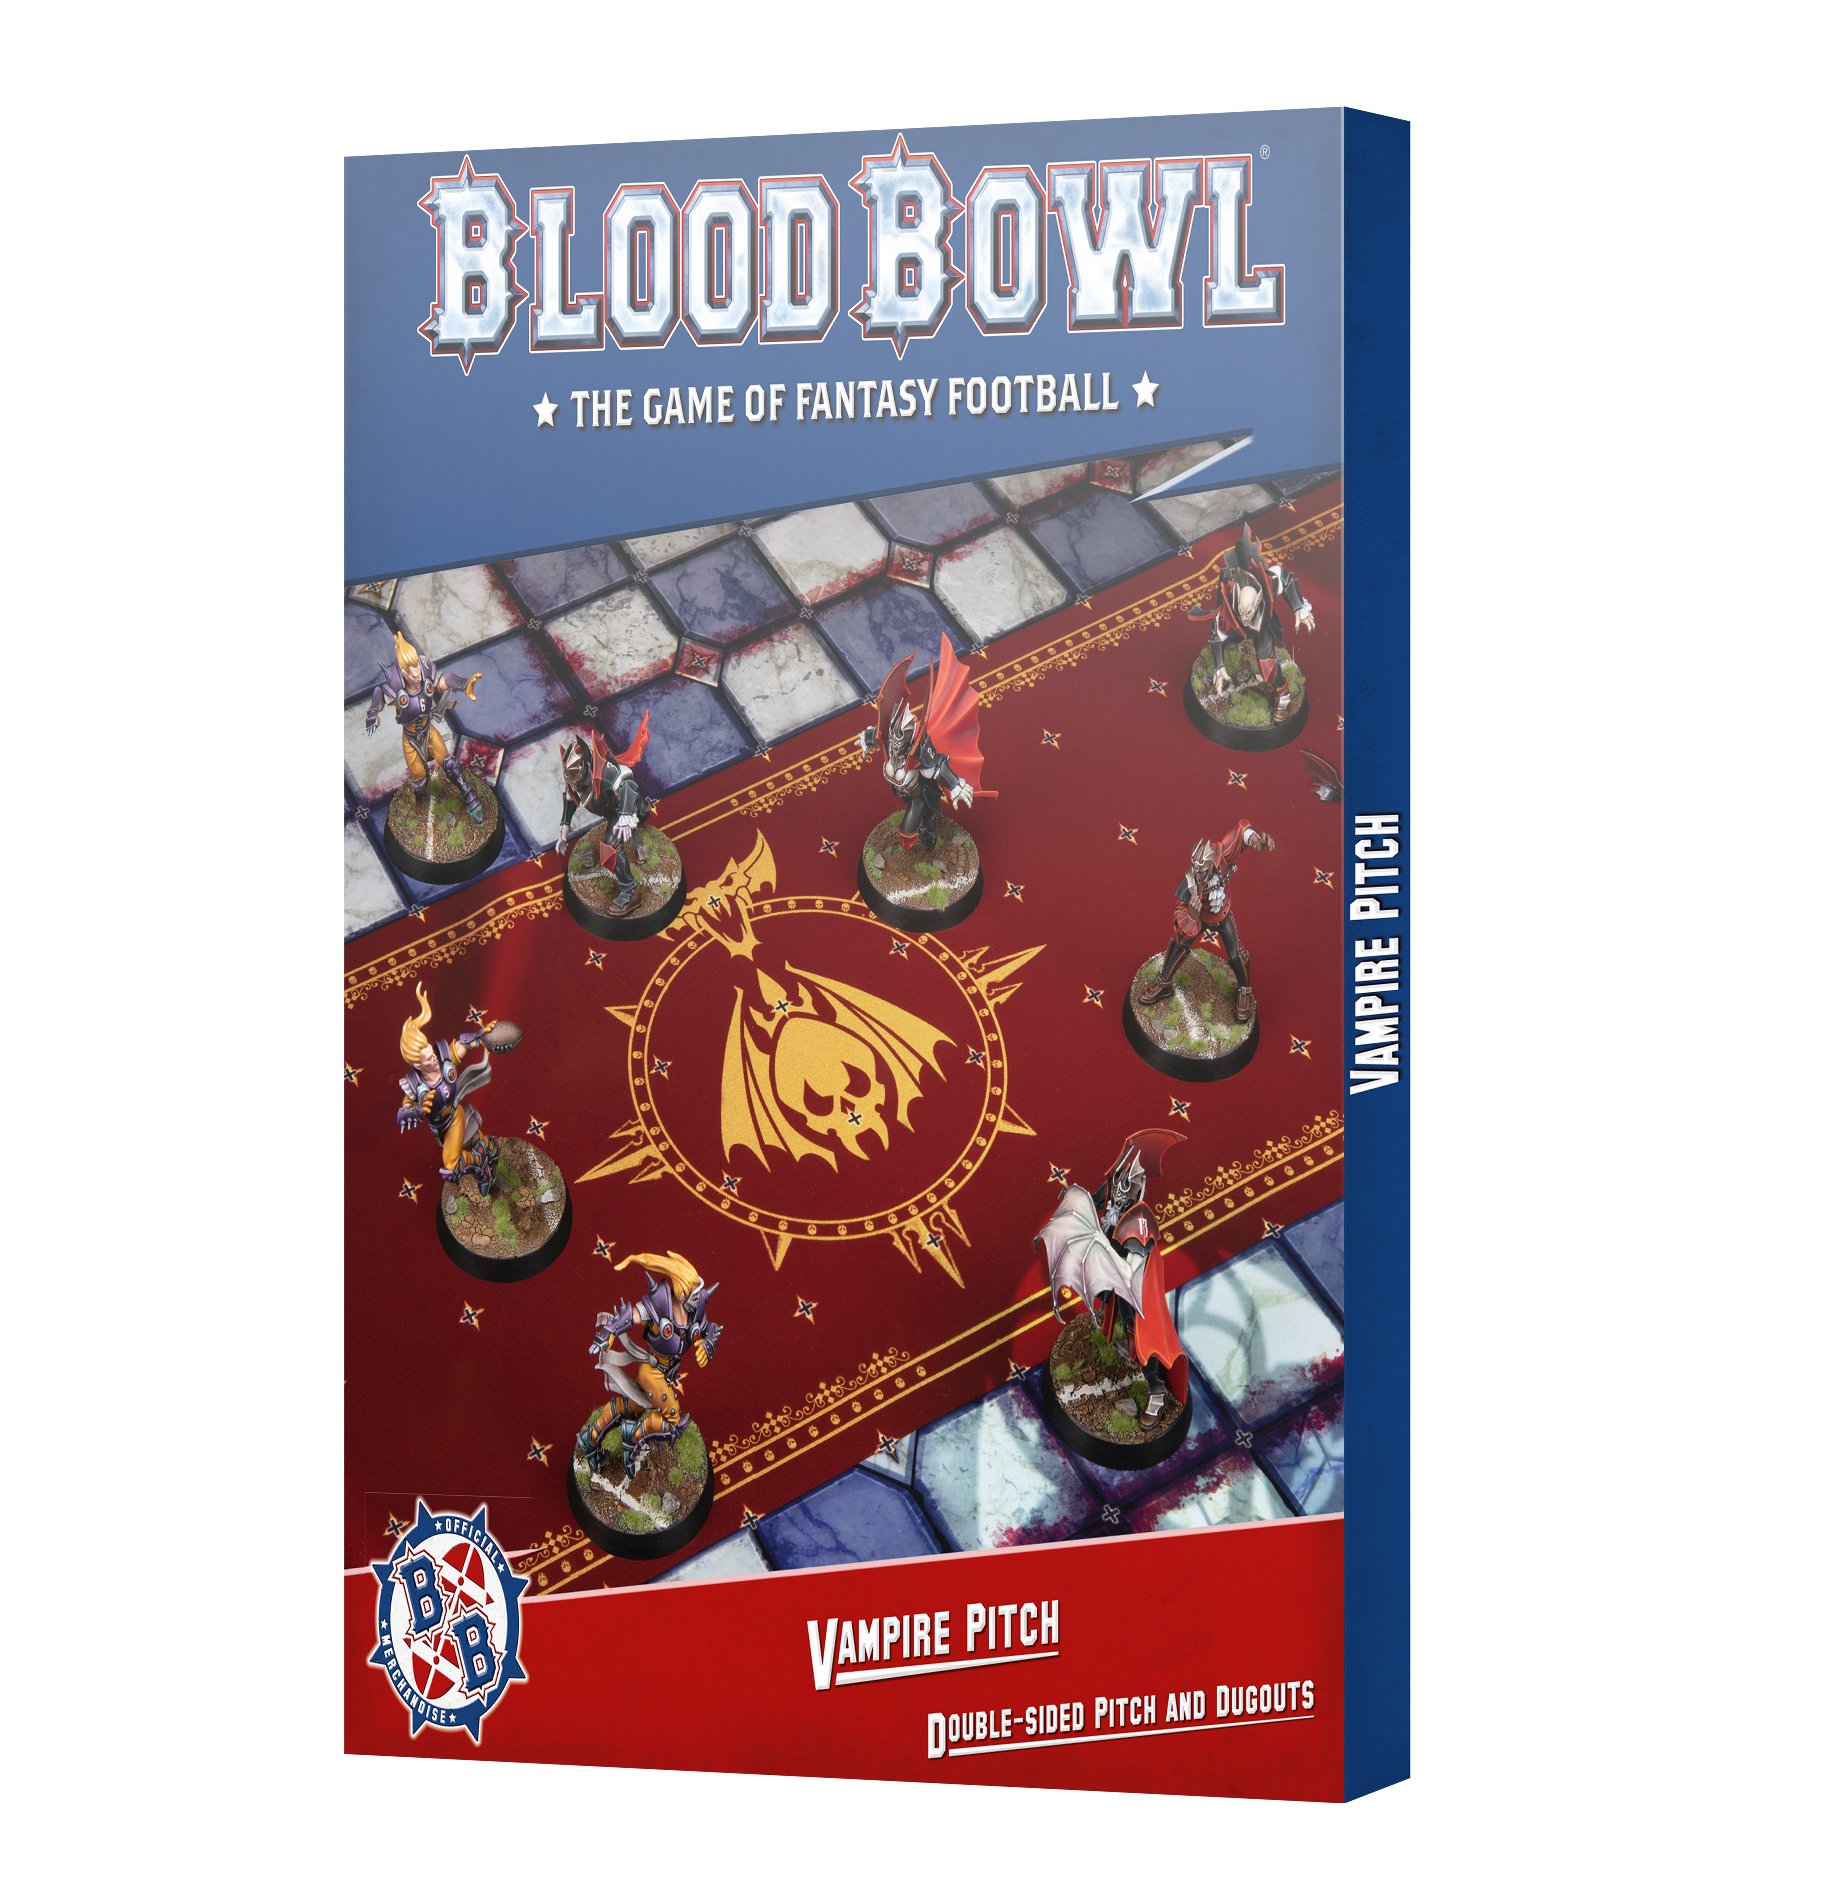 Blood Bowl: Vampire Team Pitch Dugouts (Sept 30th) 